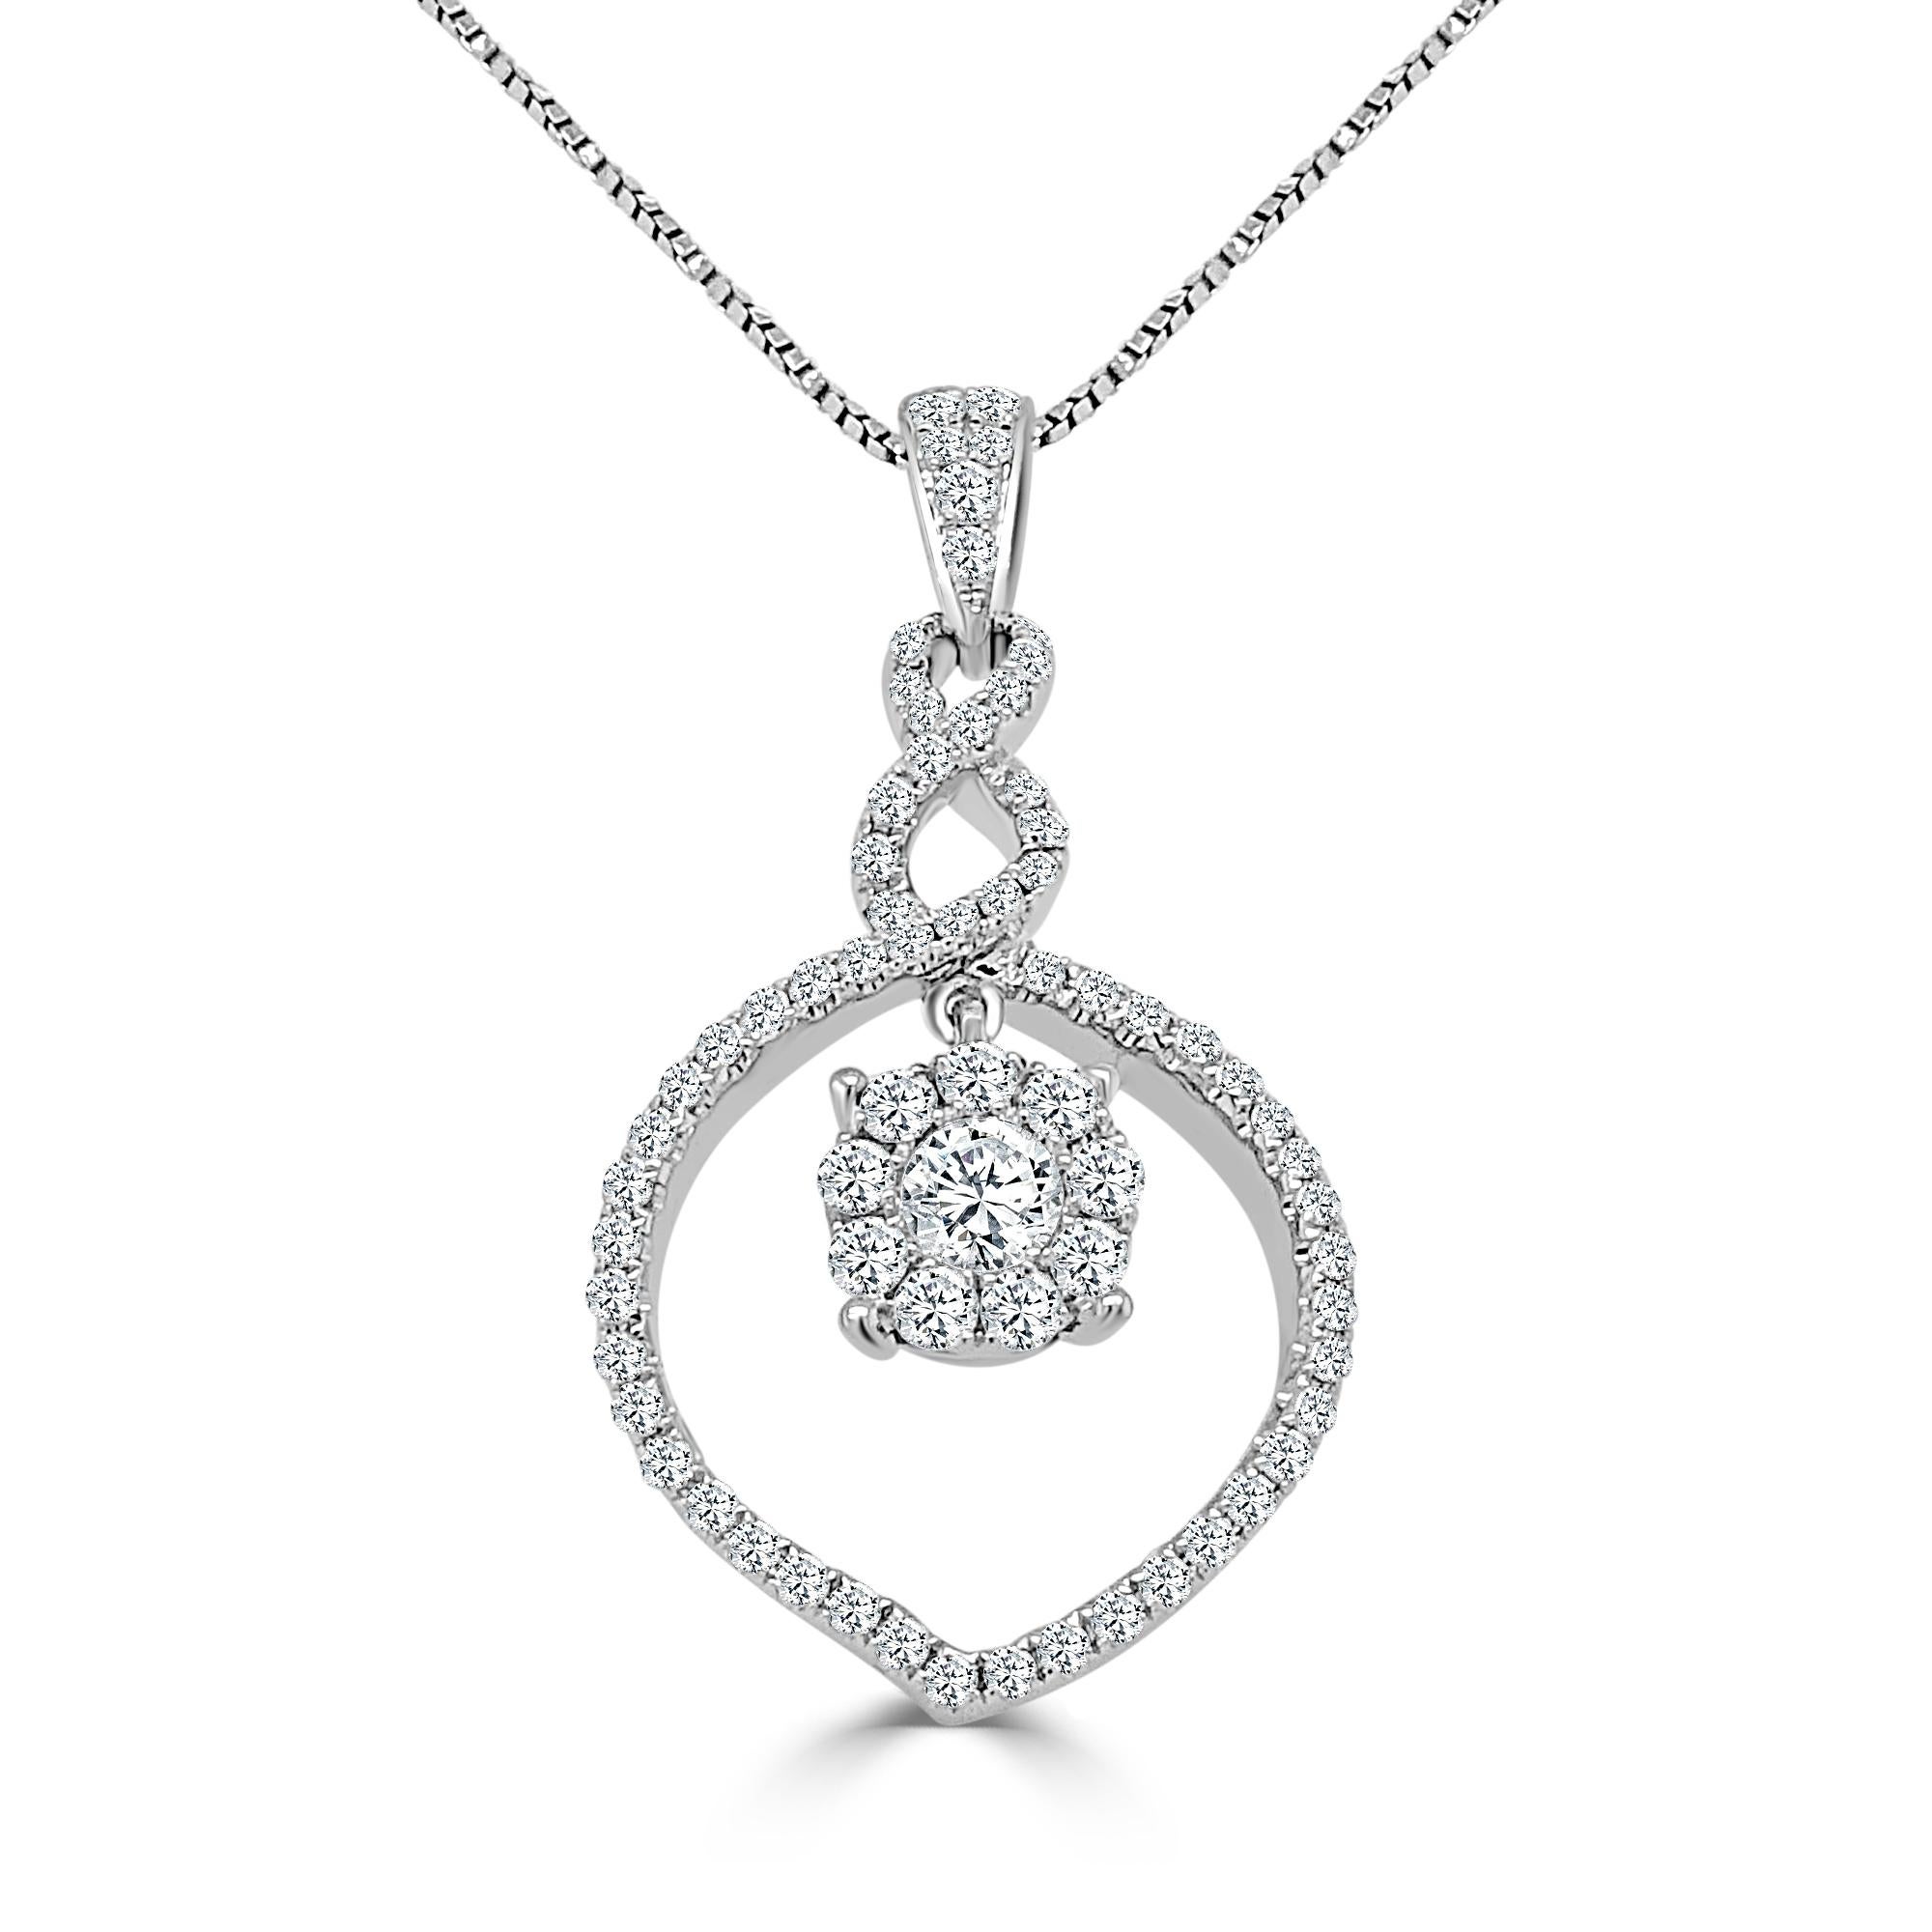 Contemporary 1/2 Carat Diamond Pendant with Chain For Sale